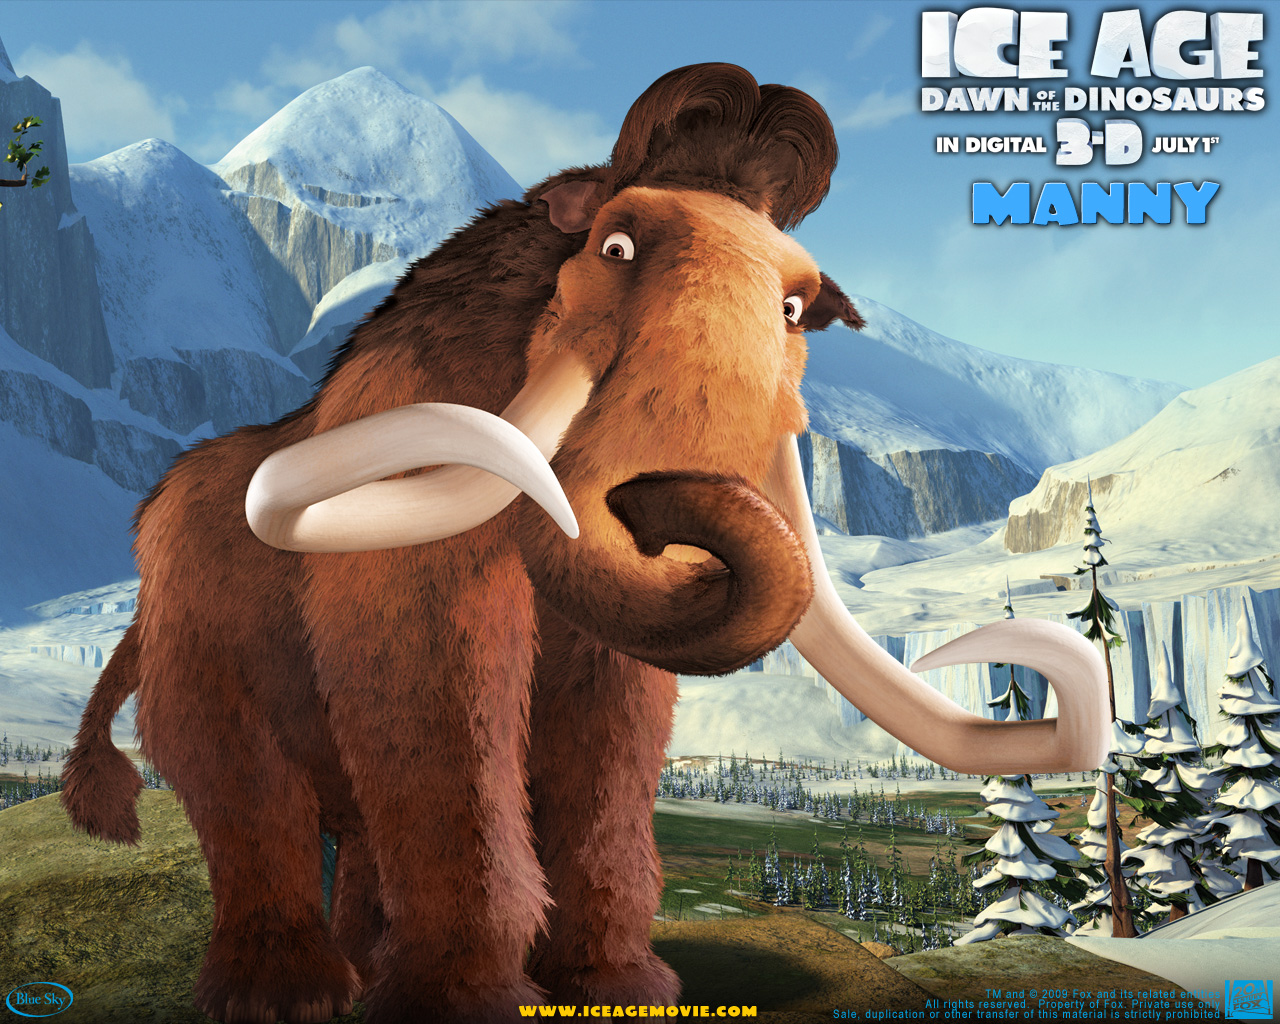  Ice Age HQ Background Images